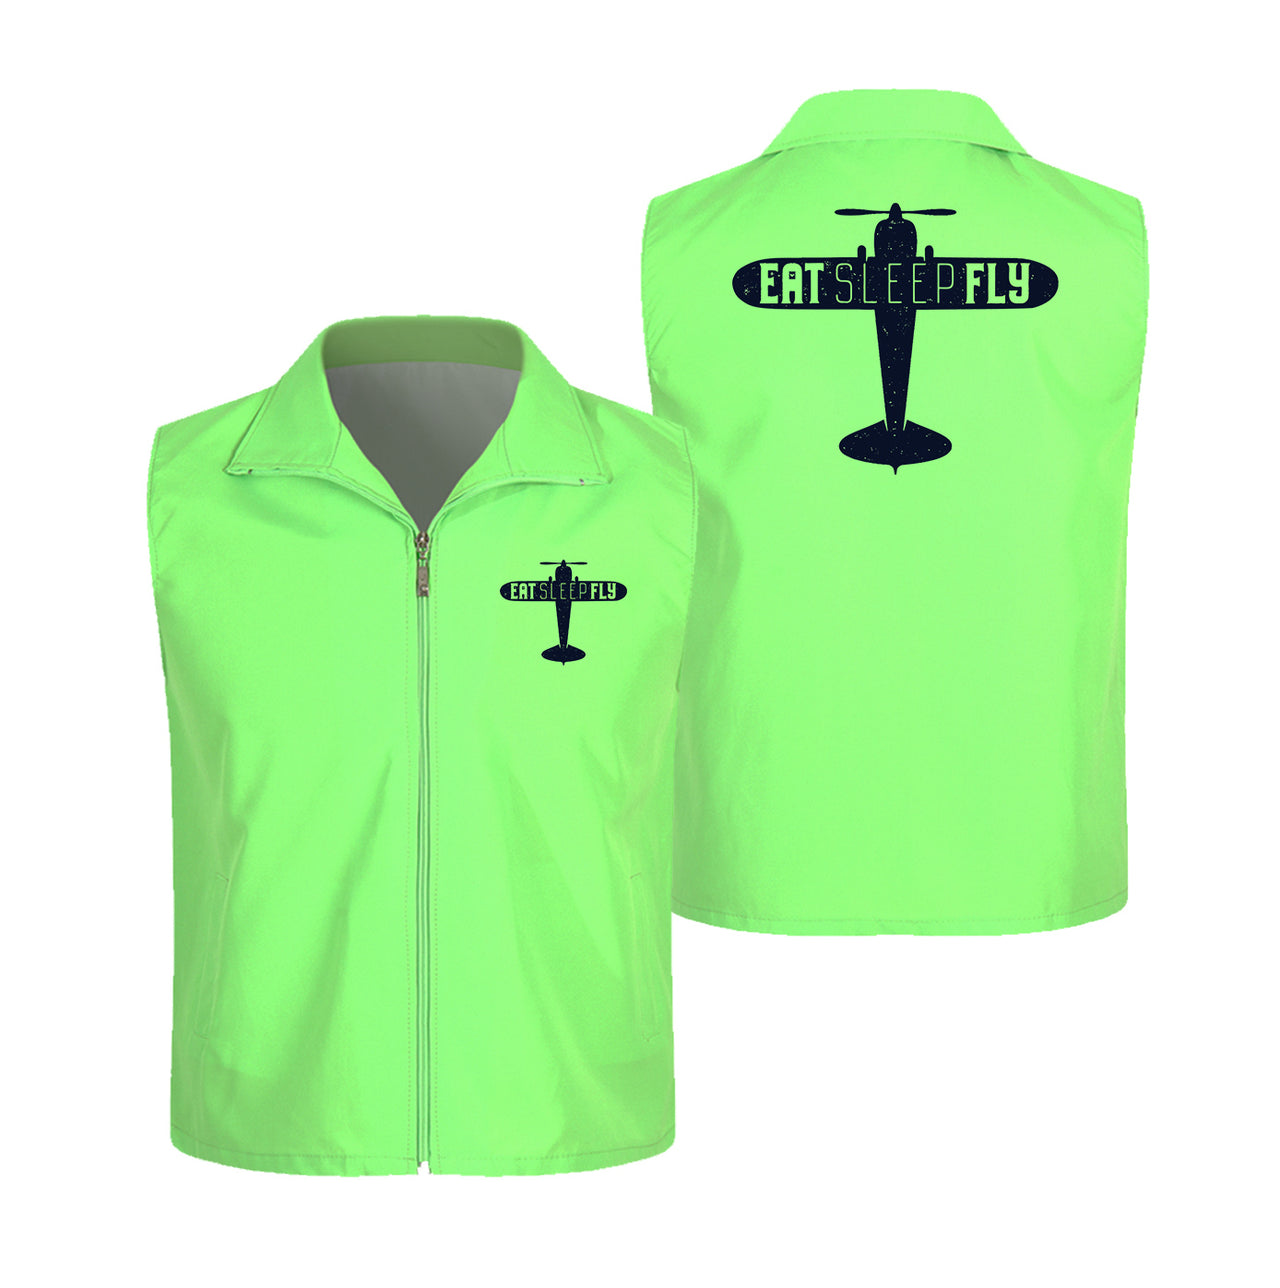 Eat Sleep Fly & Propeller Designed Thin Style Vests